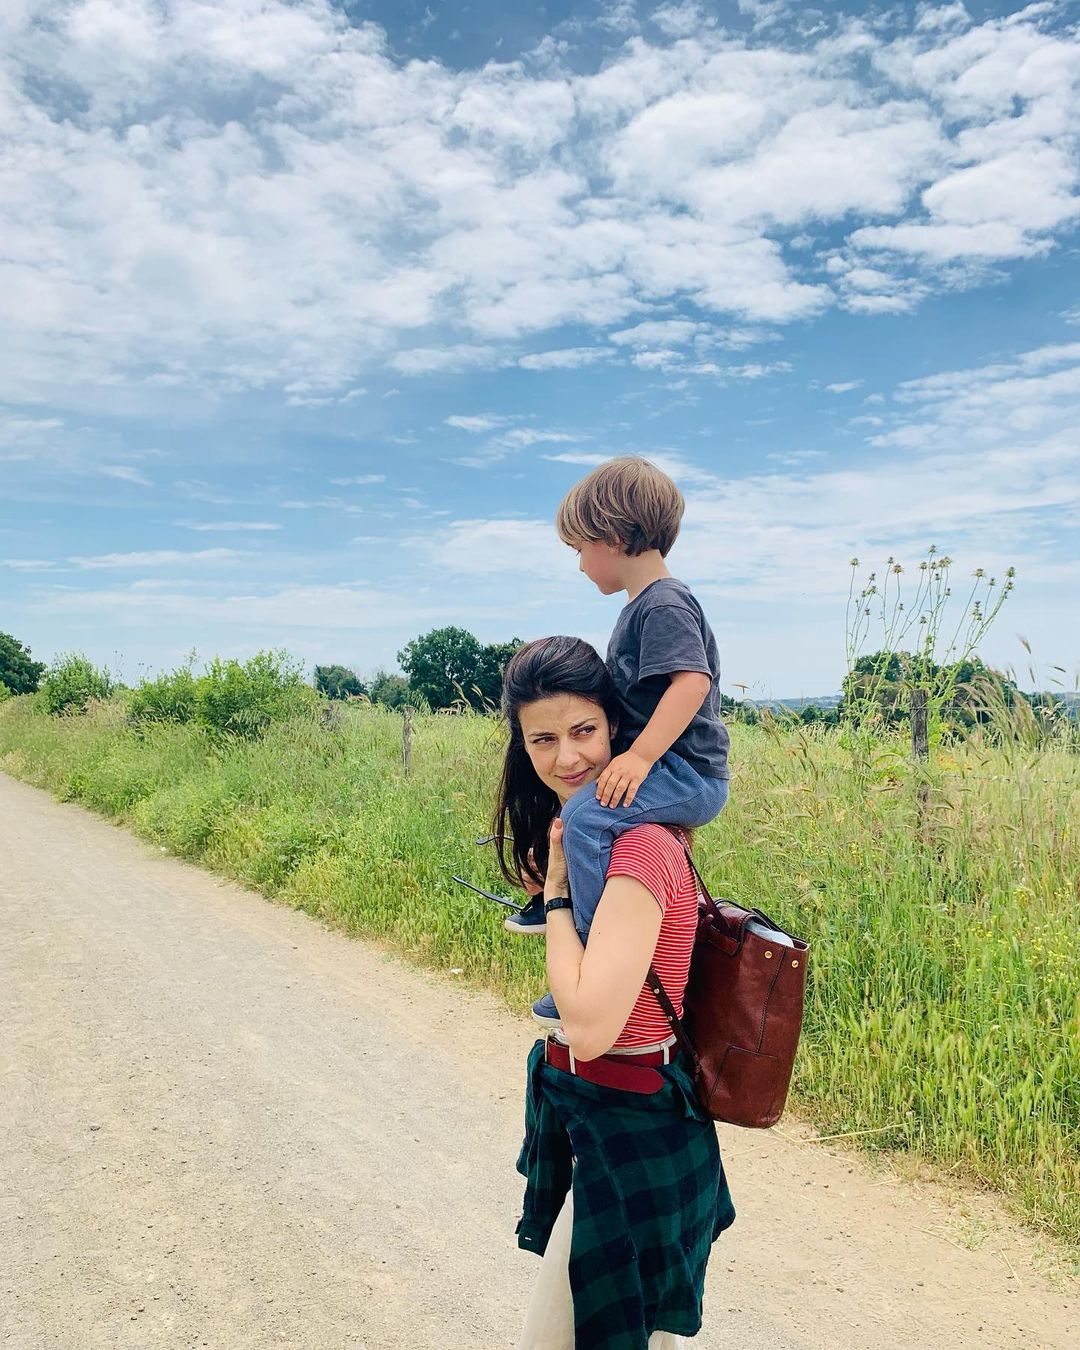 Barbara Ronchi carries her 3-year-old son Gio on her shoulder for a picture. 